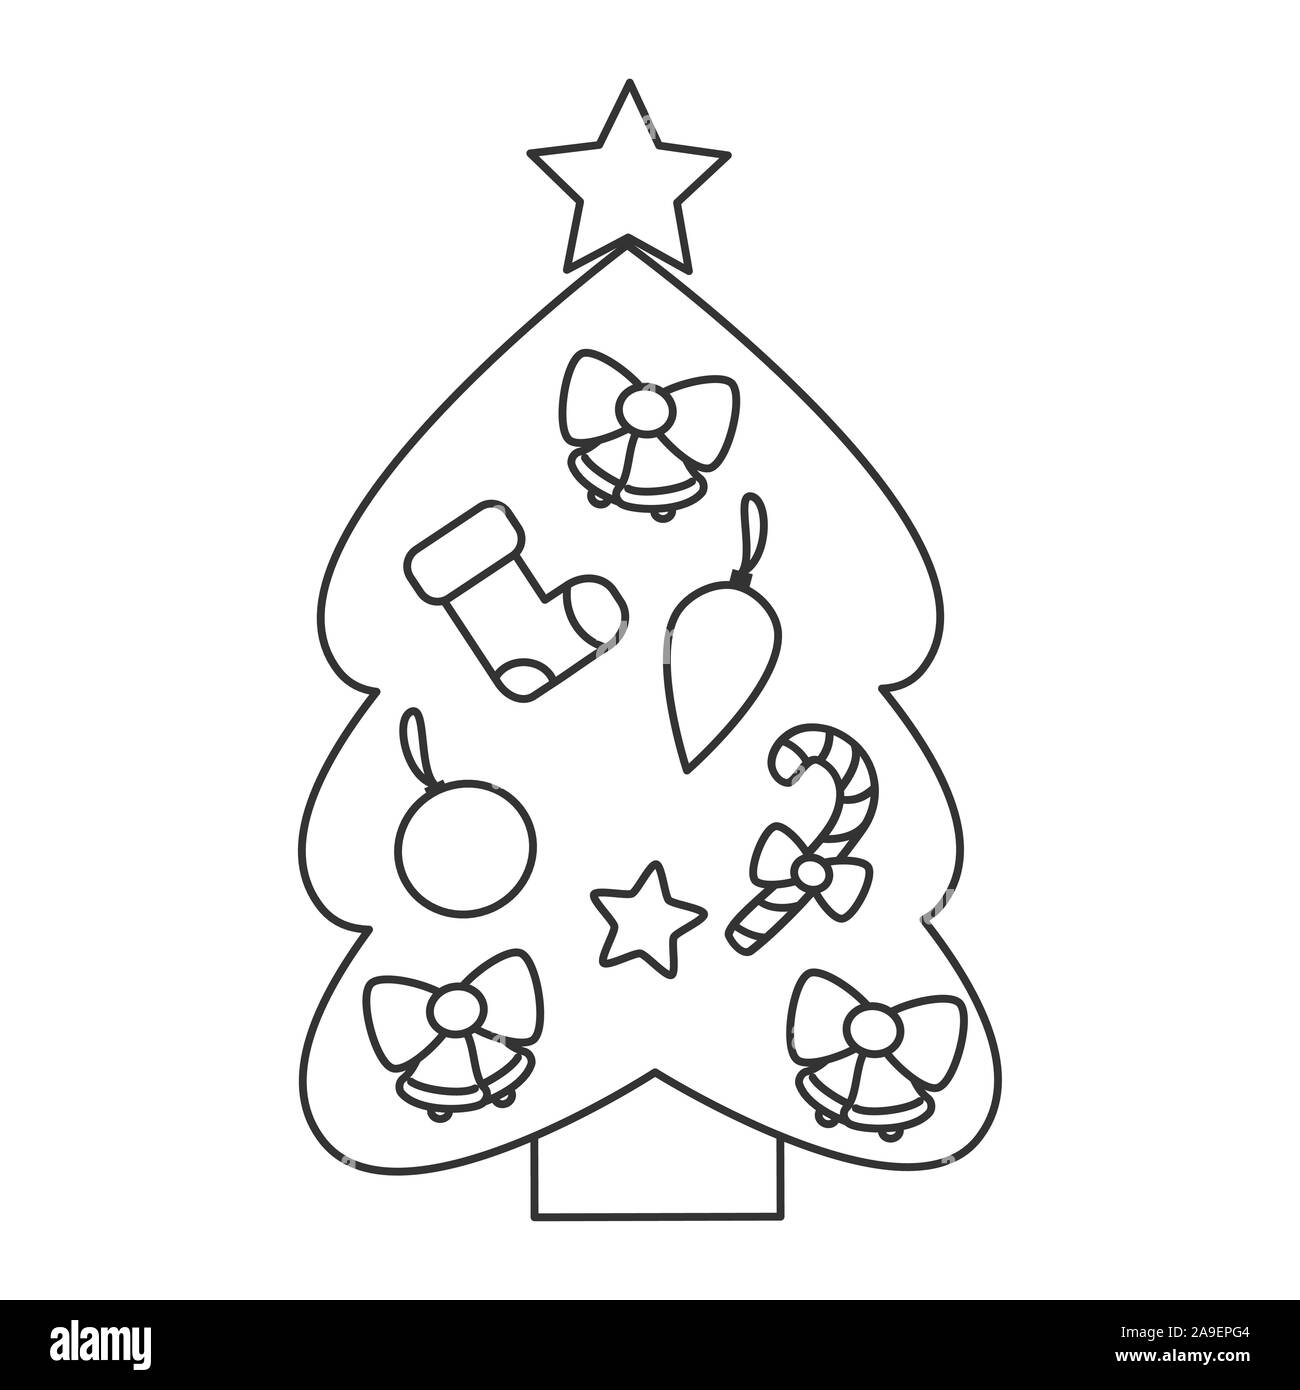 cute cartoon black and white christmas tree vector illustration for